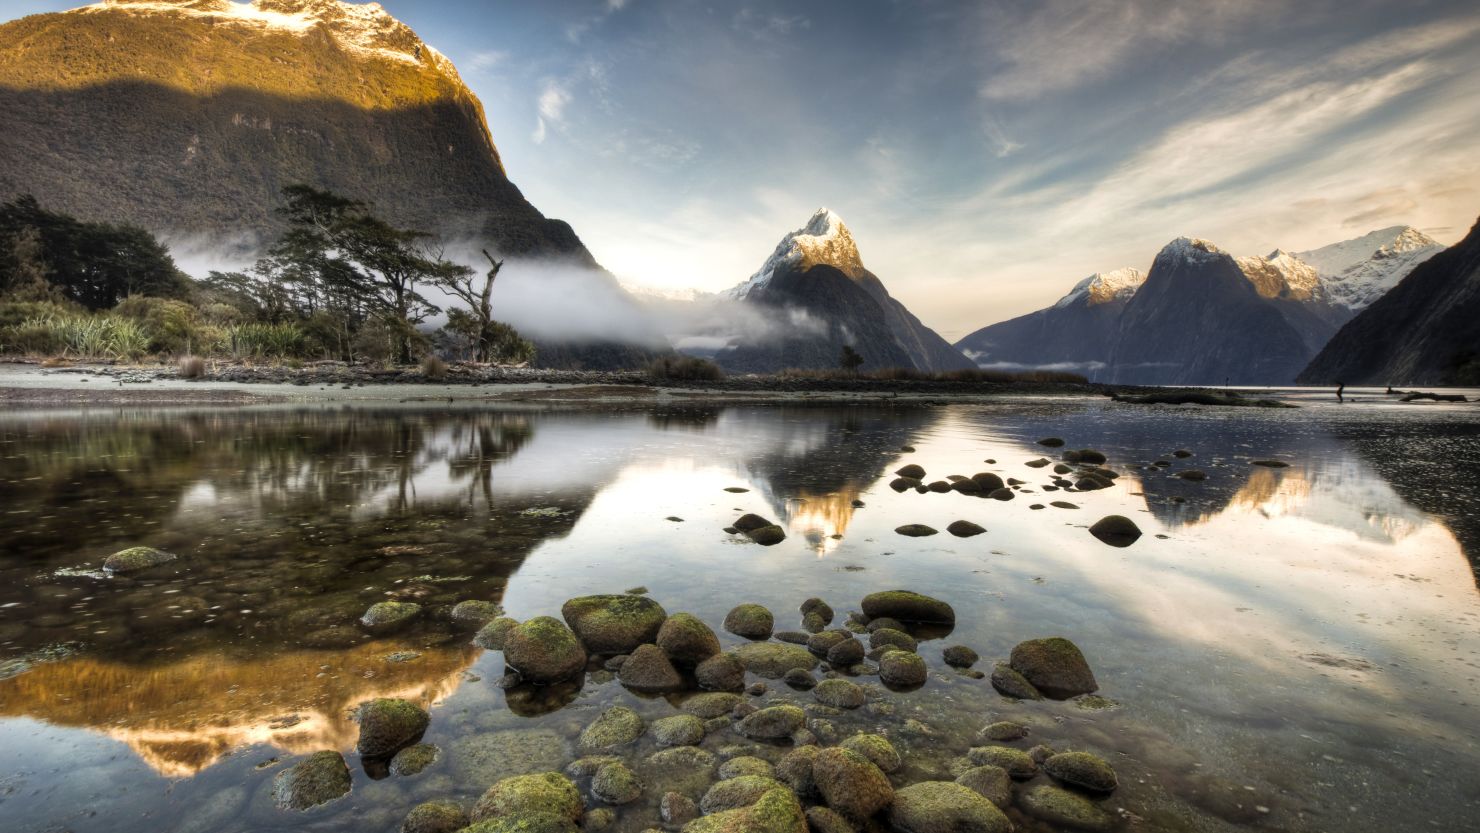 Dawn breaks during winter at Mitre Peak in Milford Sound, the most famous of the 15 fiords in Fiordland National Park.